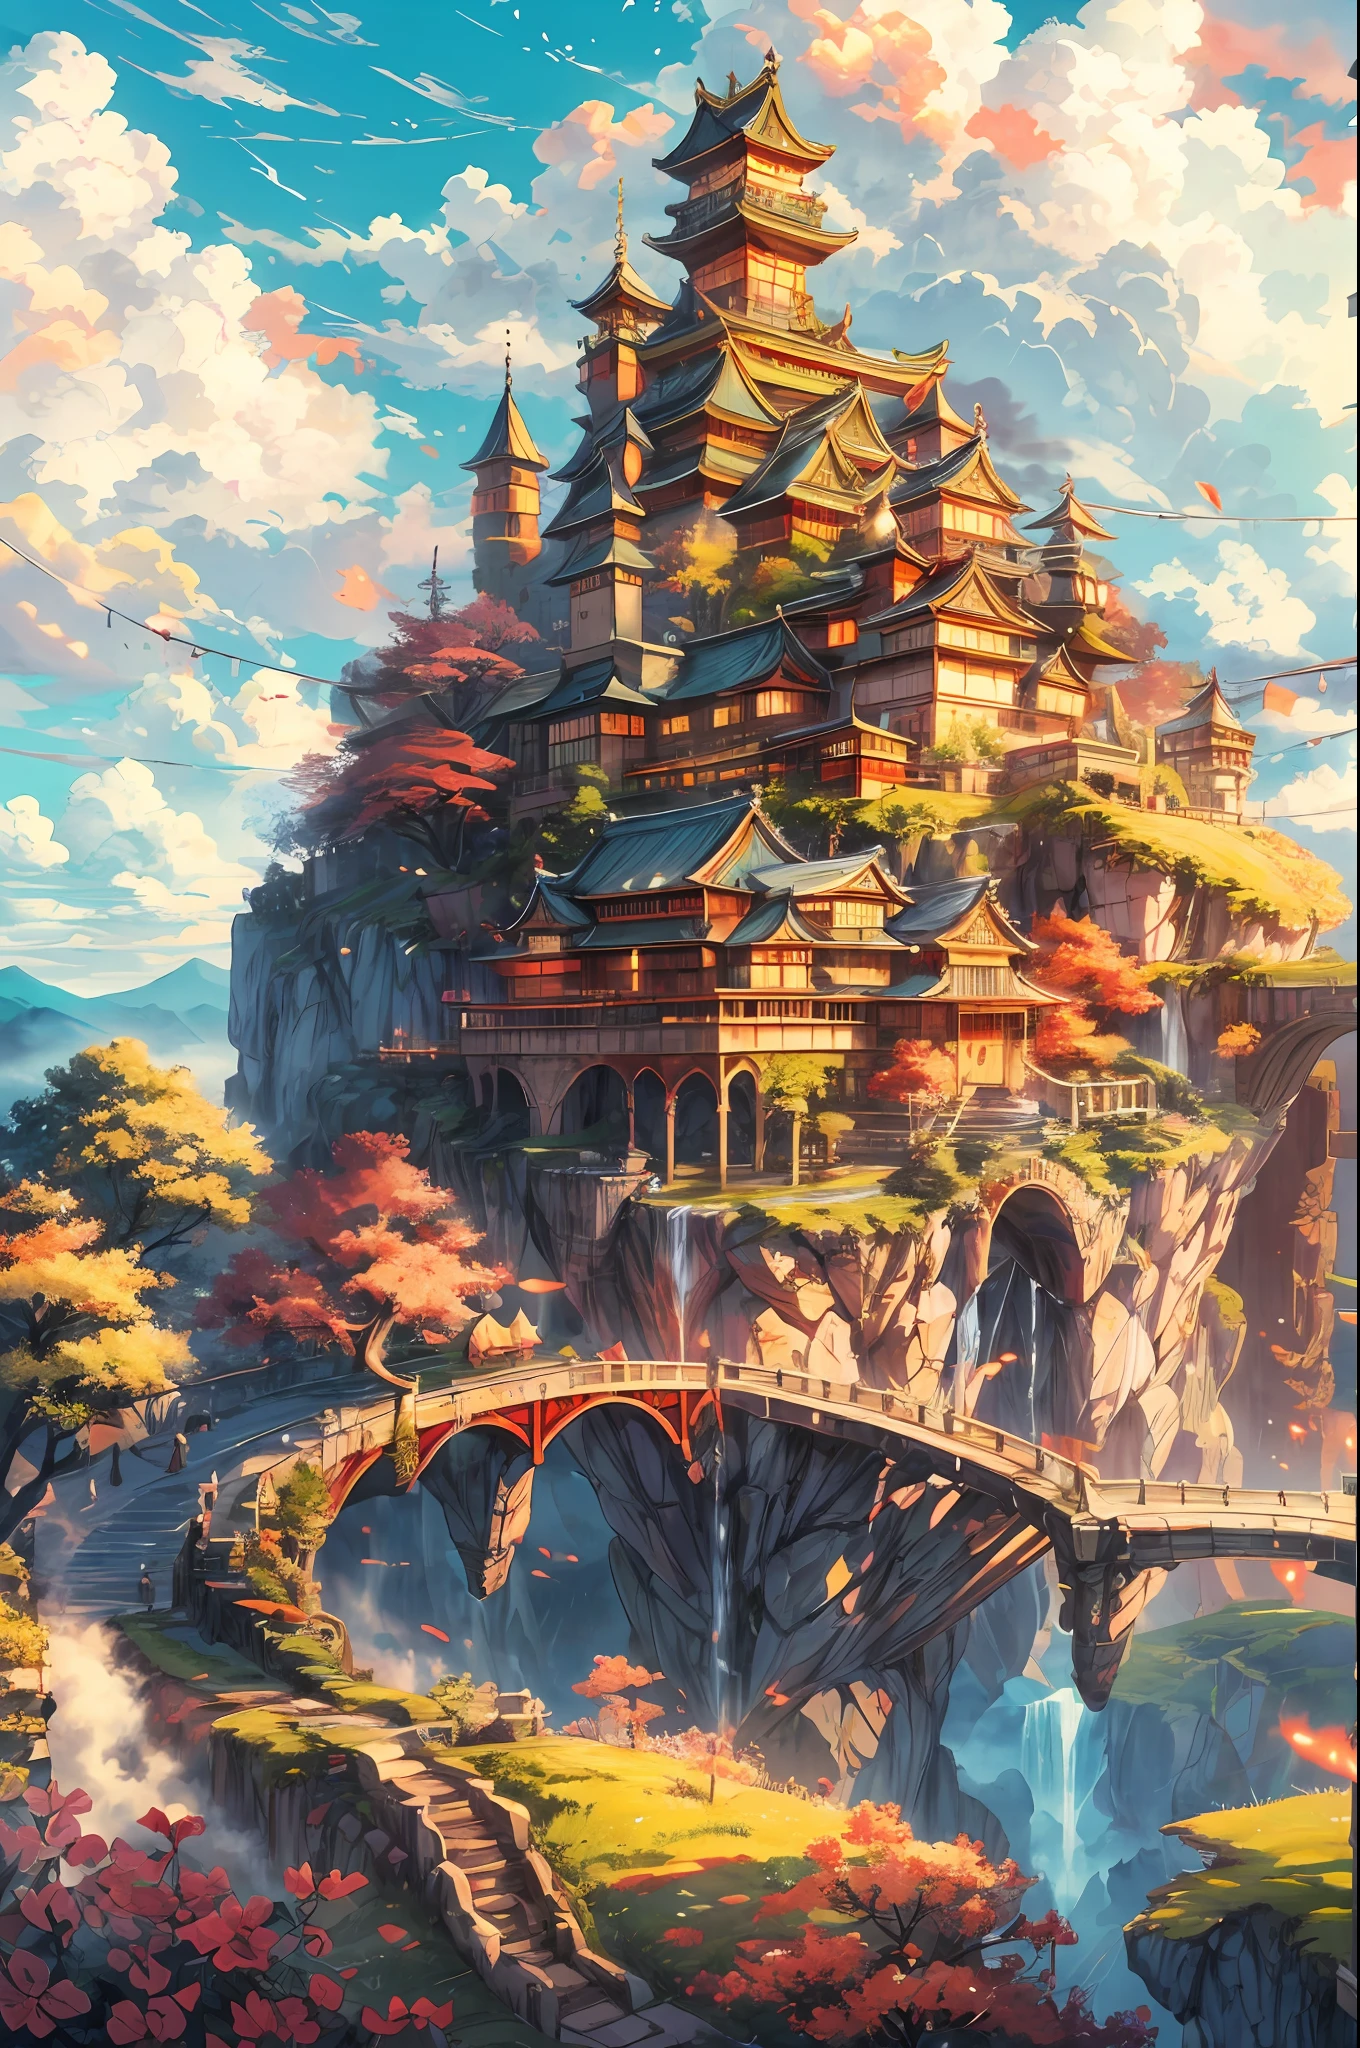 "A majestic castle floating on a sky island, reminiscent of a japanese-style fortress, suspended above fluffy clouds, basking in the warm glow of the sun, radiating vibrant colors. Masterpiece."